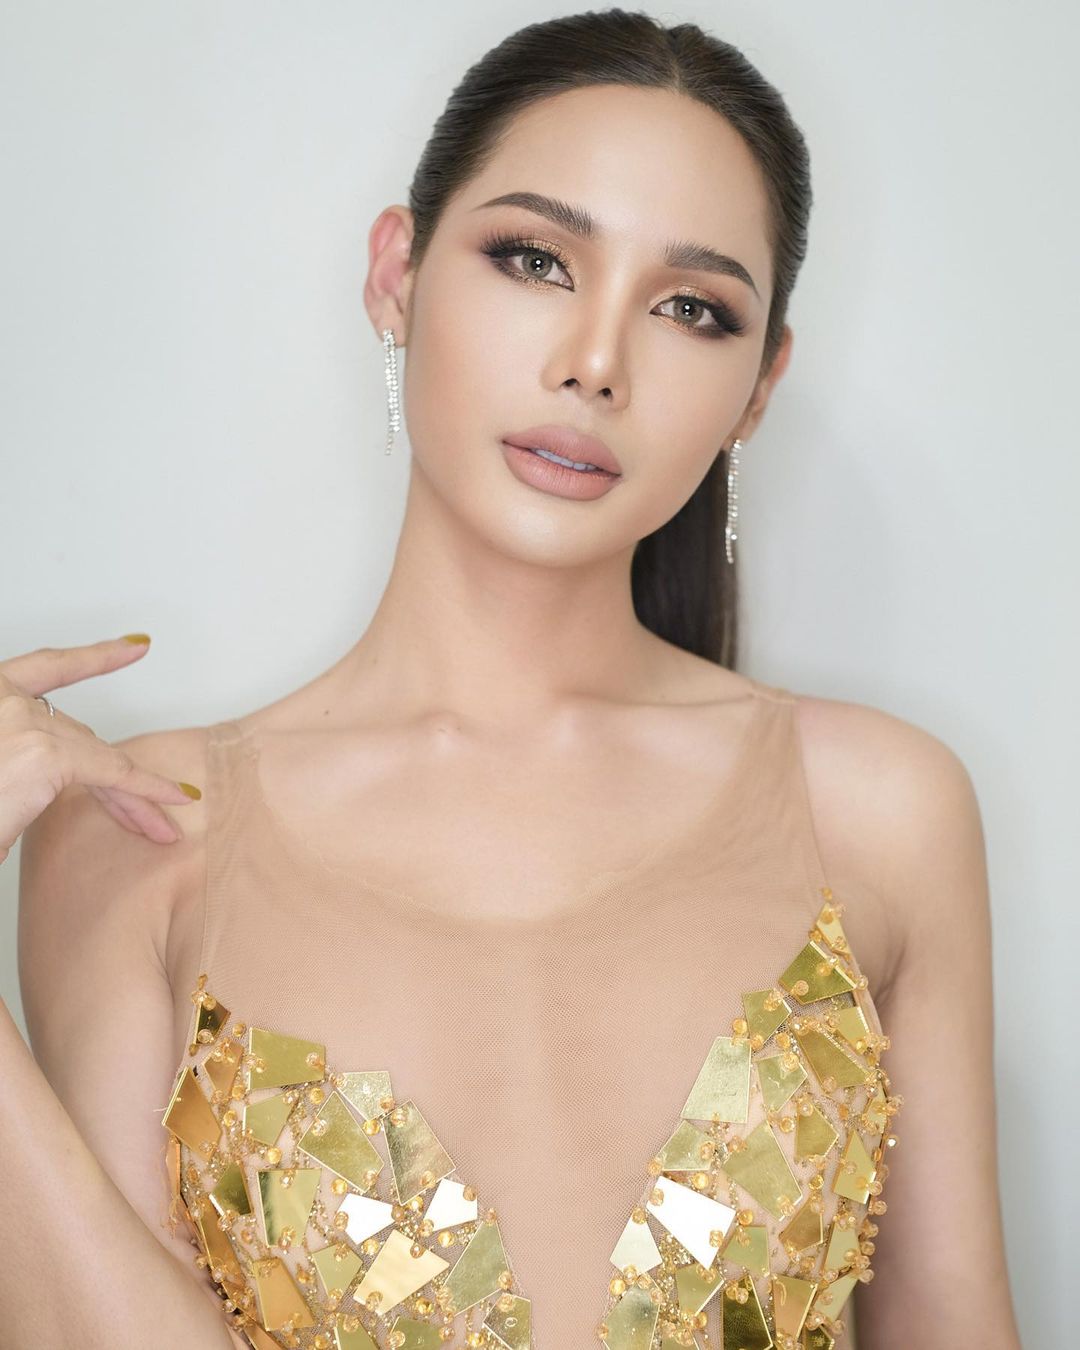 10 Most Beautiful Transwomen In Thailand (2017 Edition)